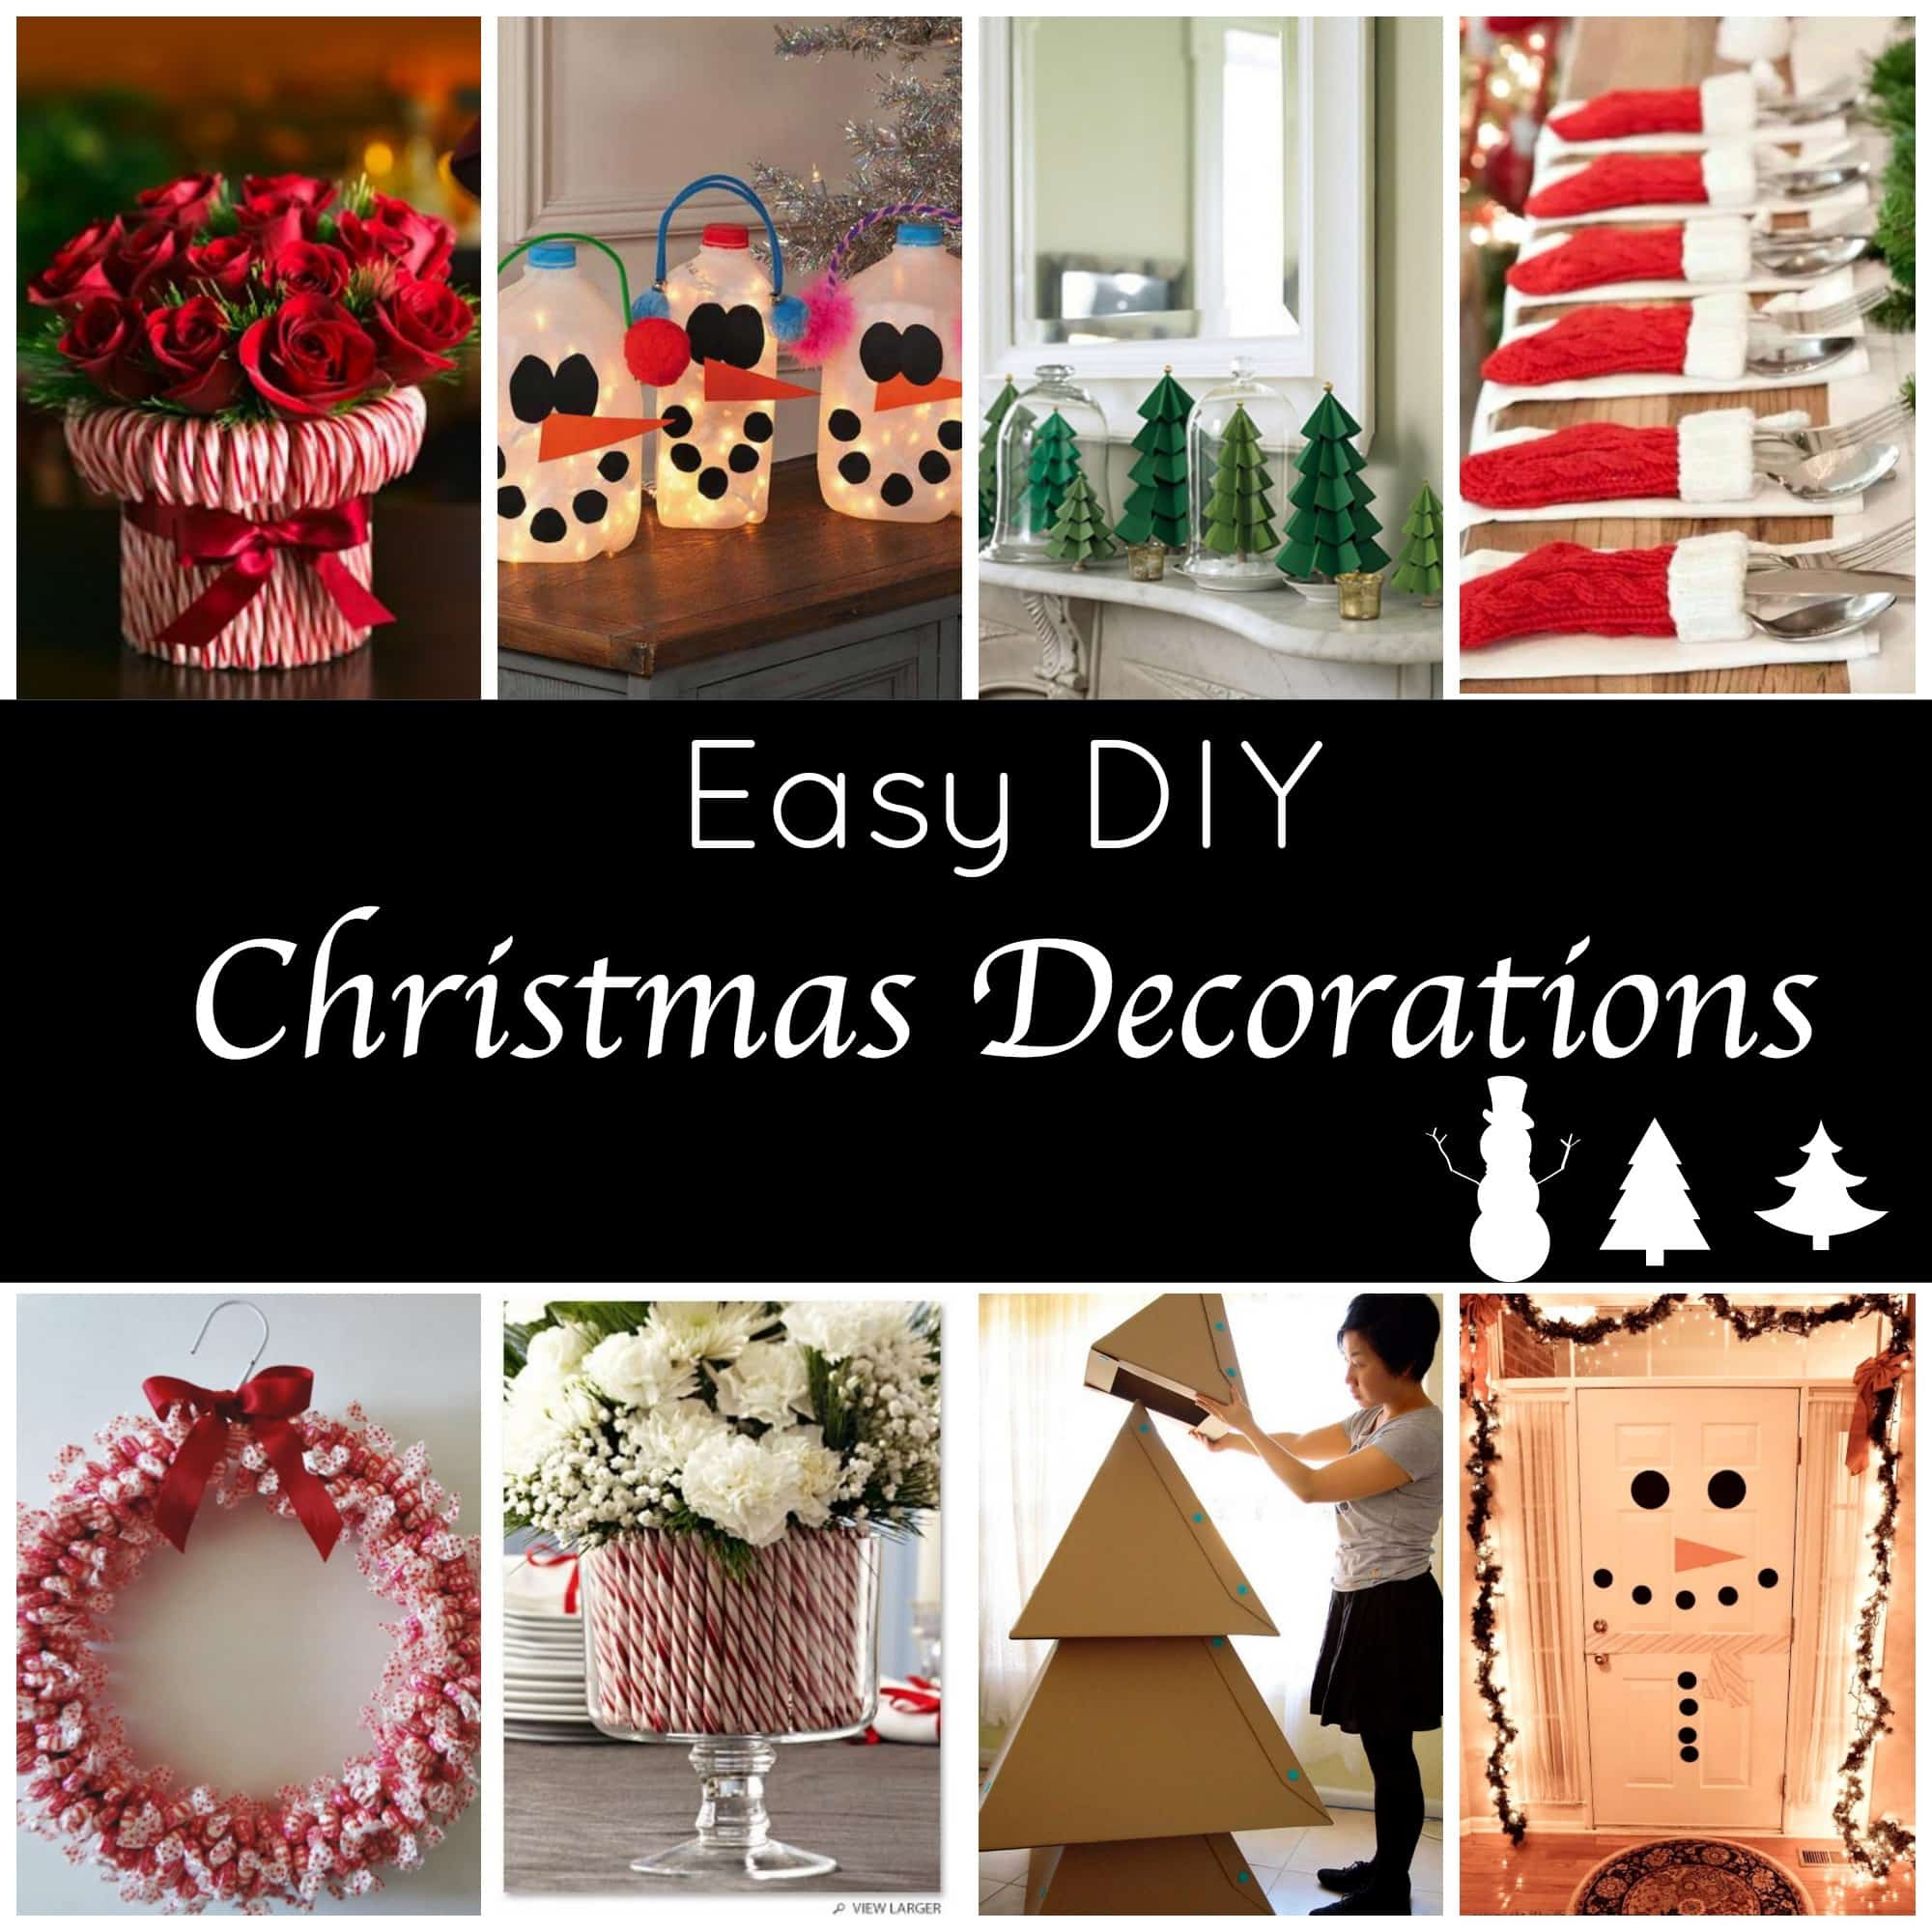 Christmas DIY Decor
 Cute and Easy DIY Holiday Decorations for a Festive Home